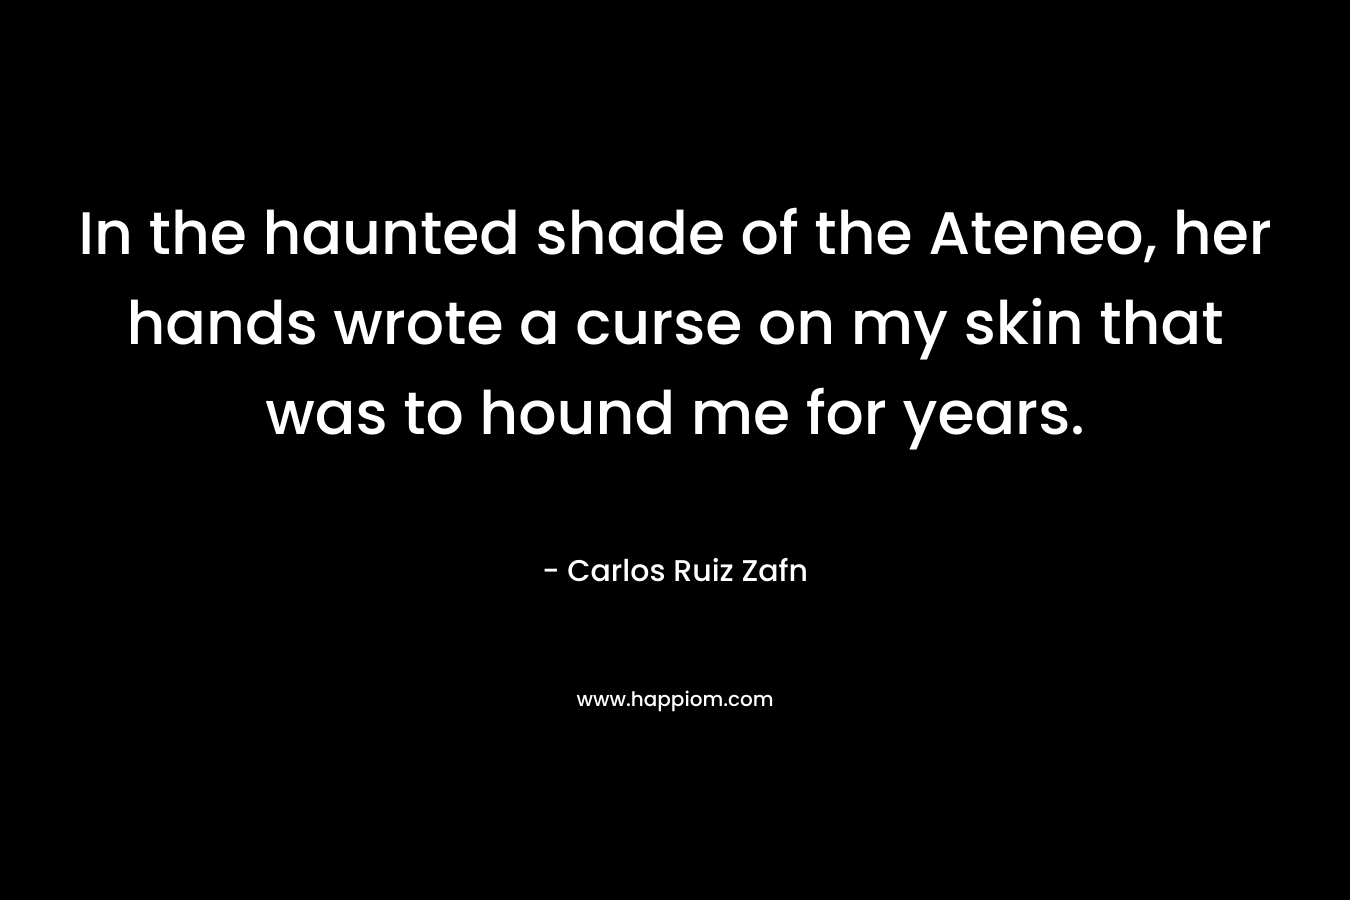 In the haunted shade of the Ateneo, her hands wrote a curse on my skin that was to hound me for years.